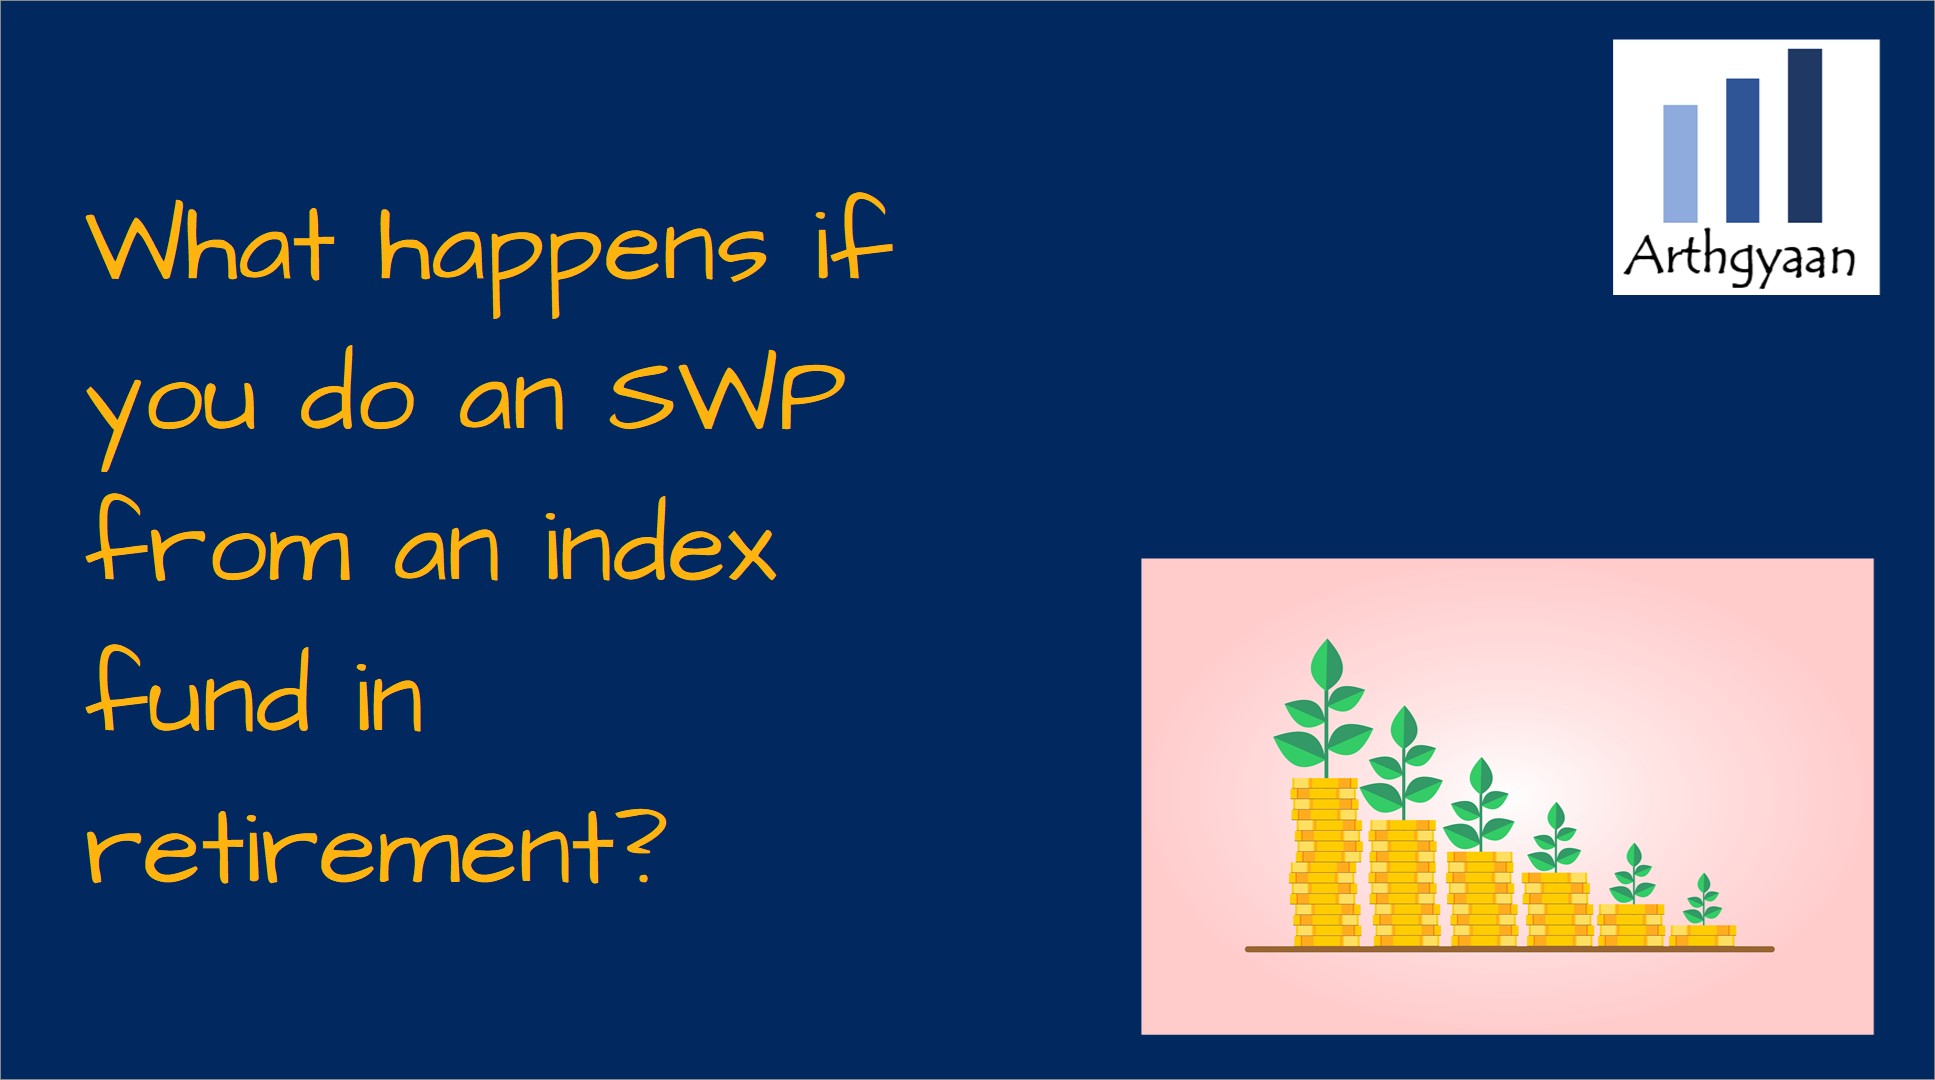 What happens if you do an SWP from an index fund in retirement?